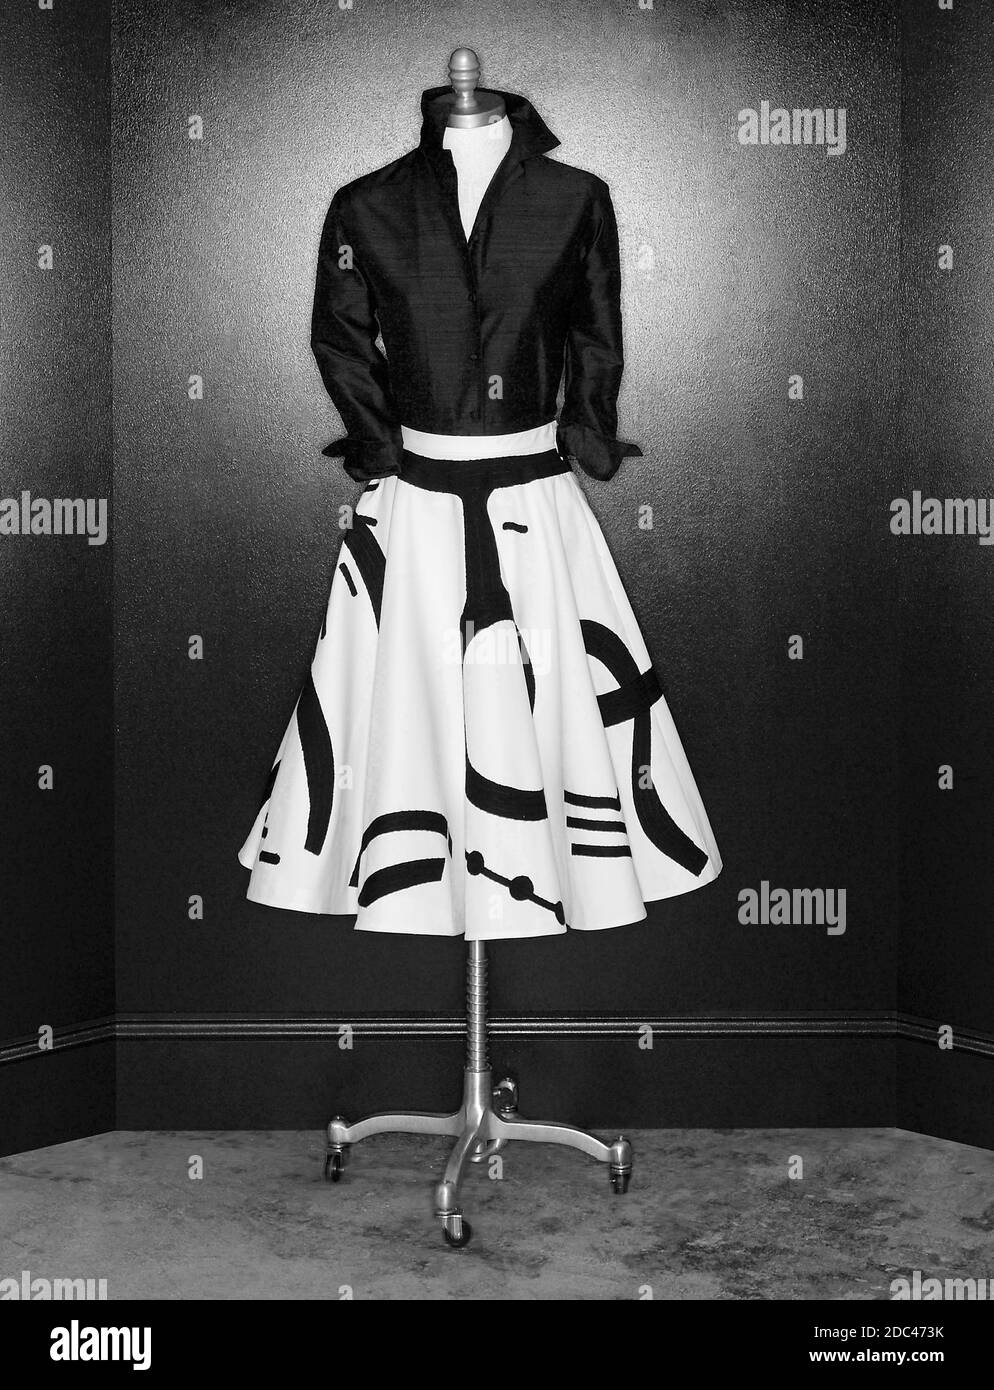 Mannequin with graphic black and white skirt with black top in vertical studio photograph.  Black wall background with glow from ring light. Stock Photo